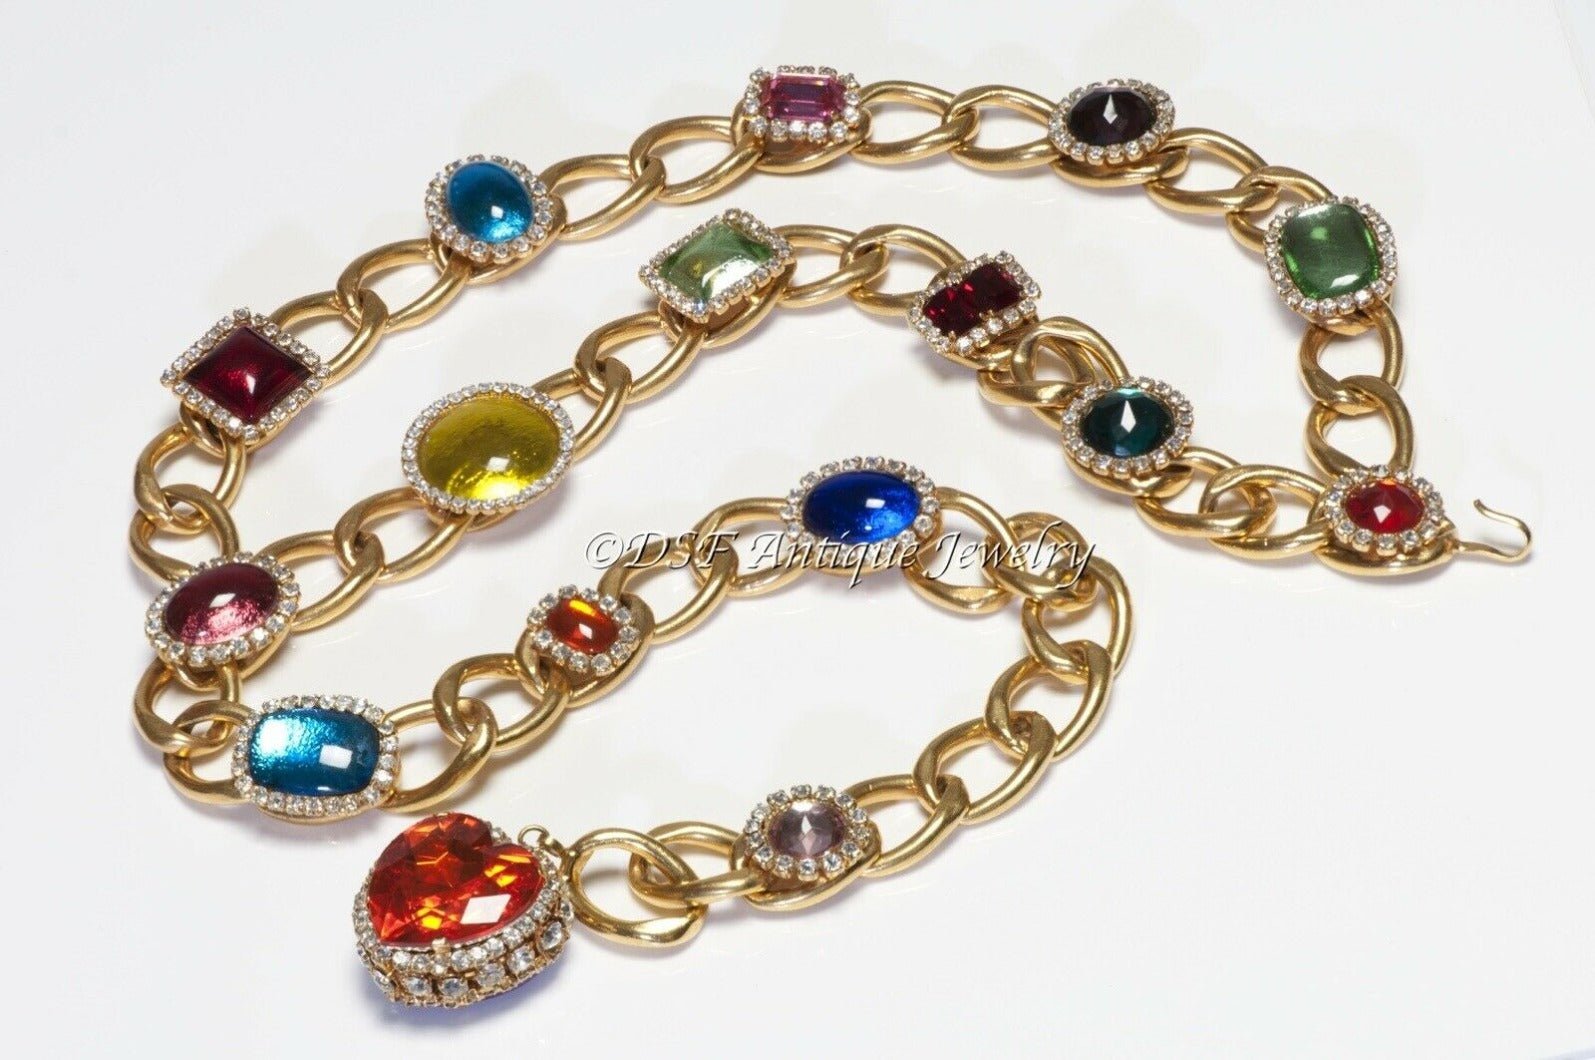 CHANEL Spring 1995 Multicolored Crystal Lucite Heart Chain Belt